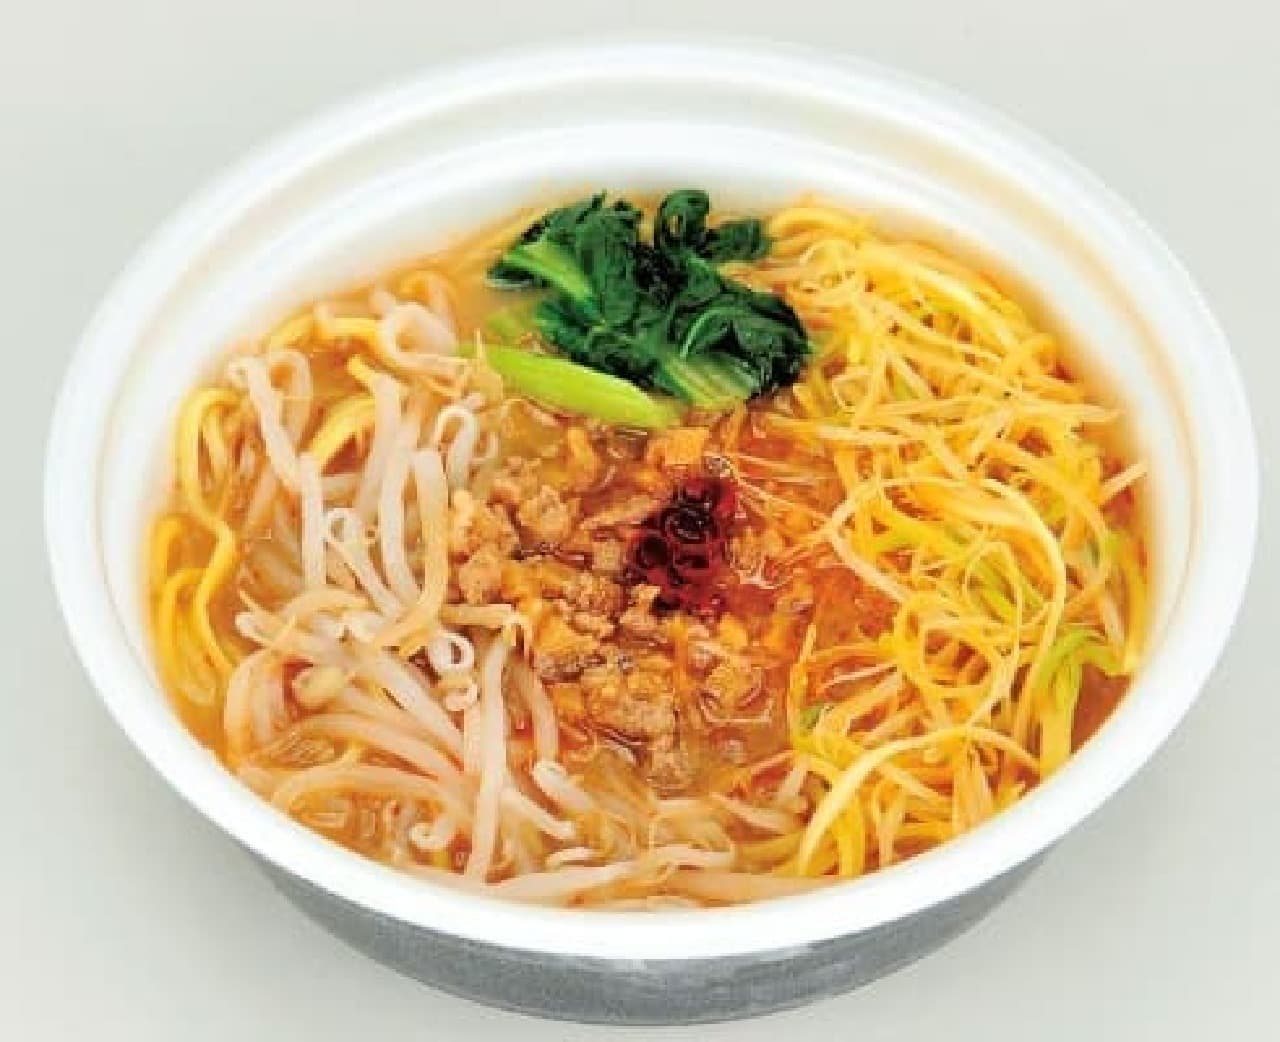 Low-carbohydrate "range tantan noodles" with 24.7 grams of sugar is now available